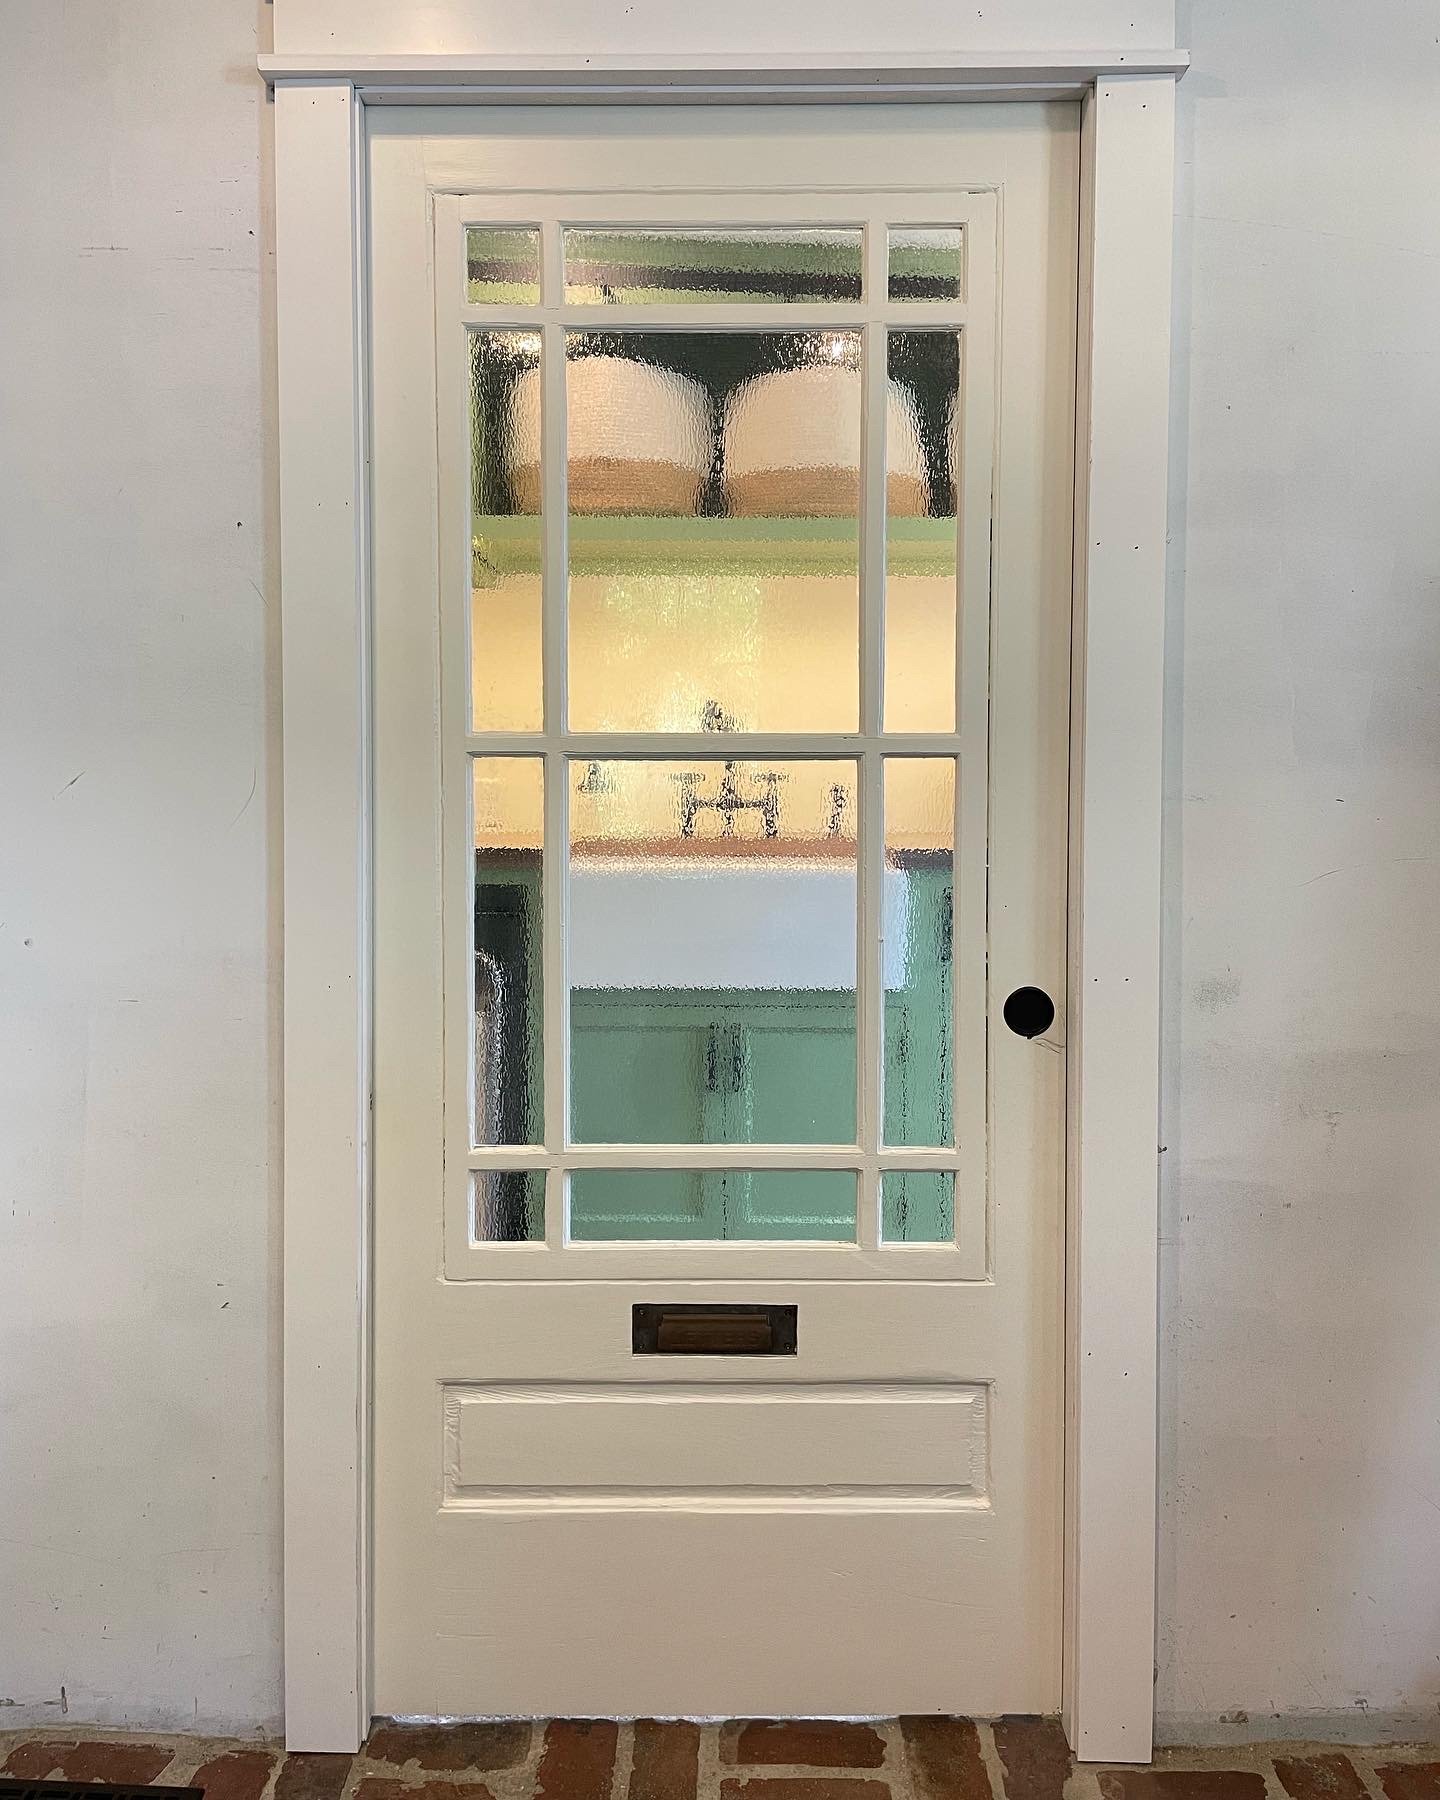  Between the laundry room and our mudroom, we installed this antique porch door as a pocket door. The original mail slot on the door added to the porch theme we were going for.   